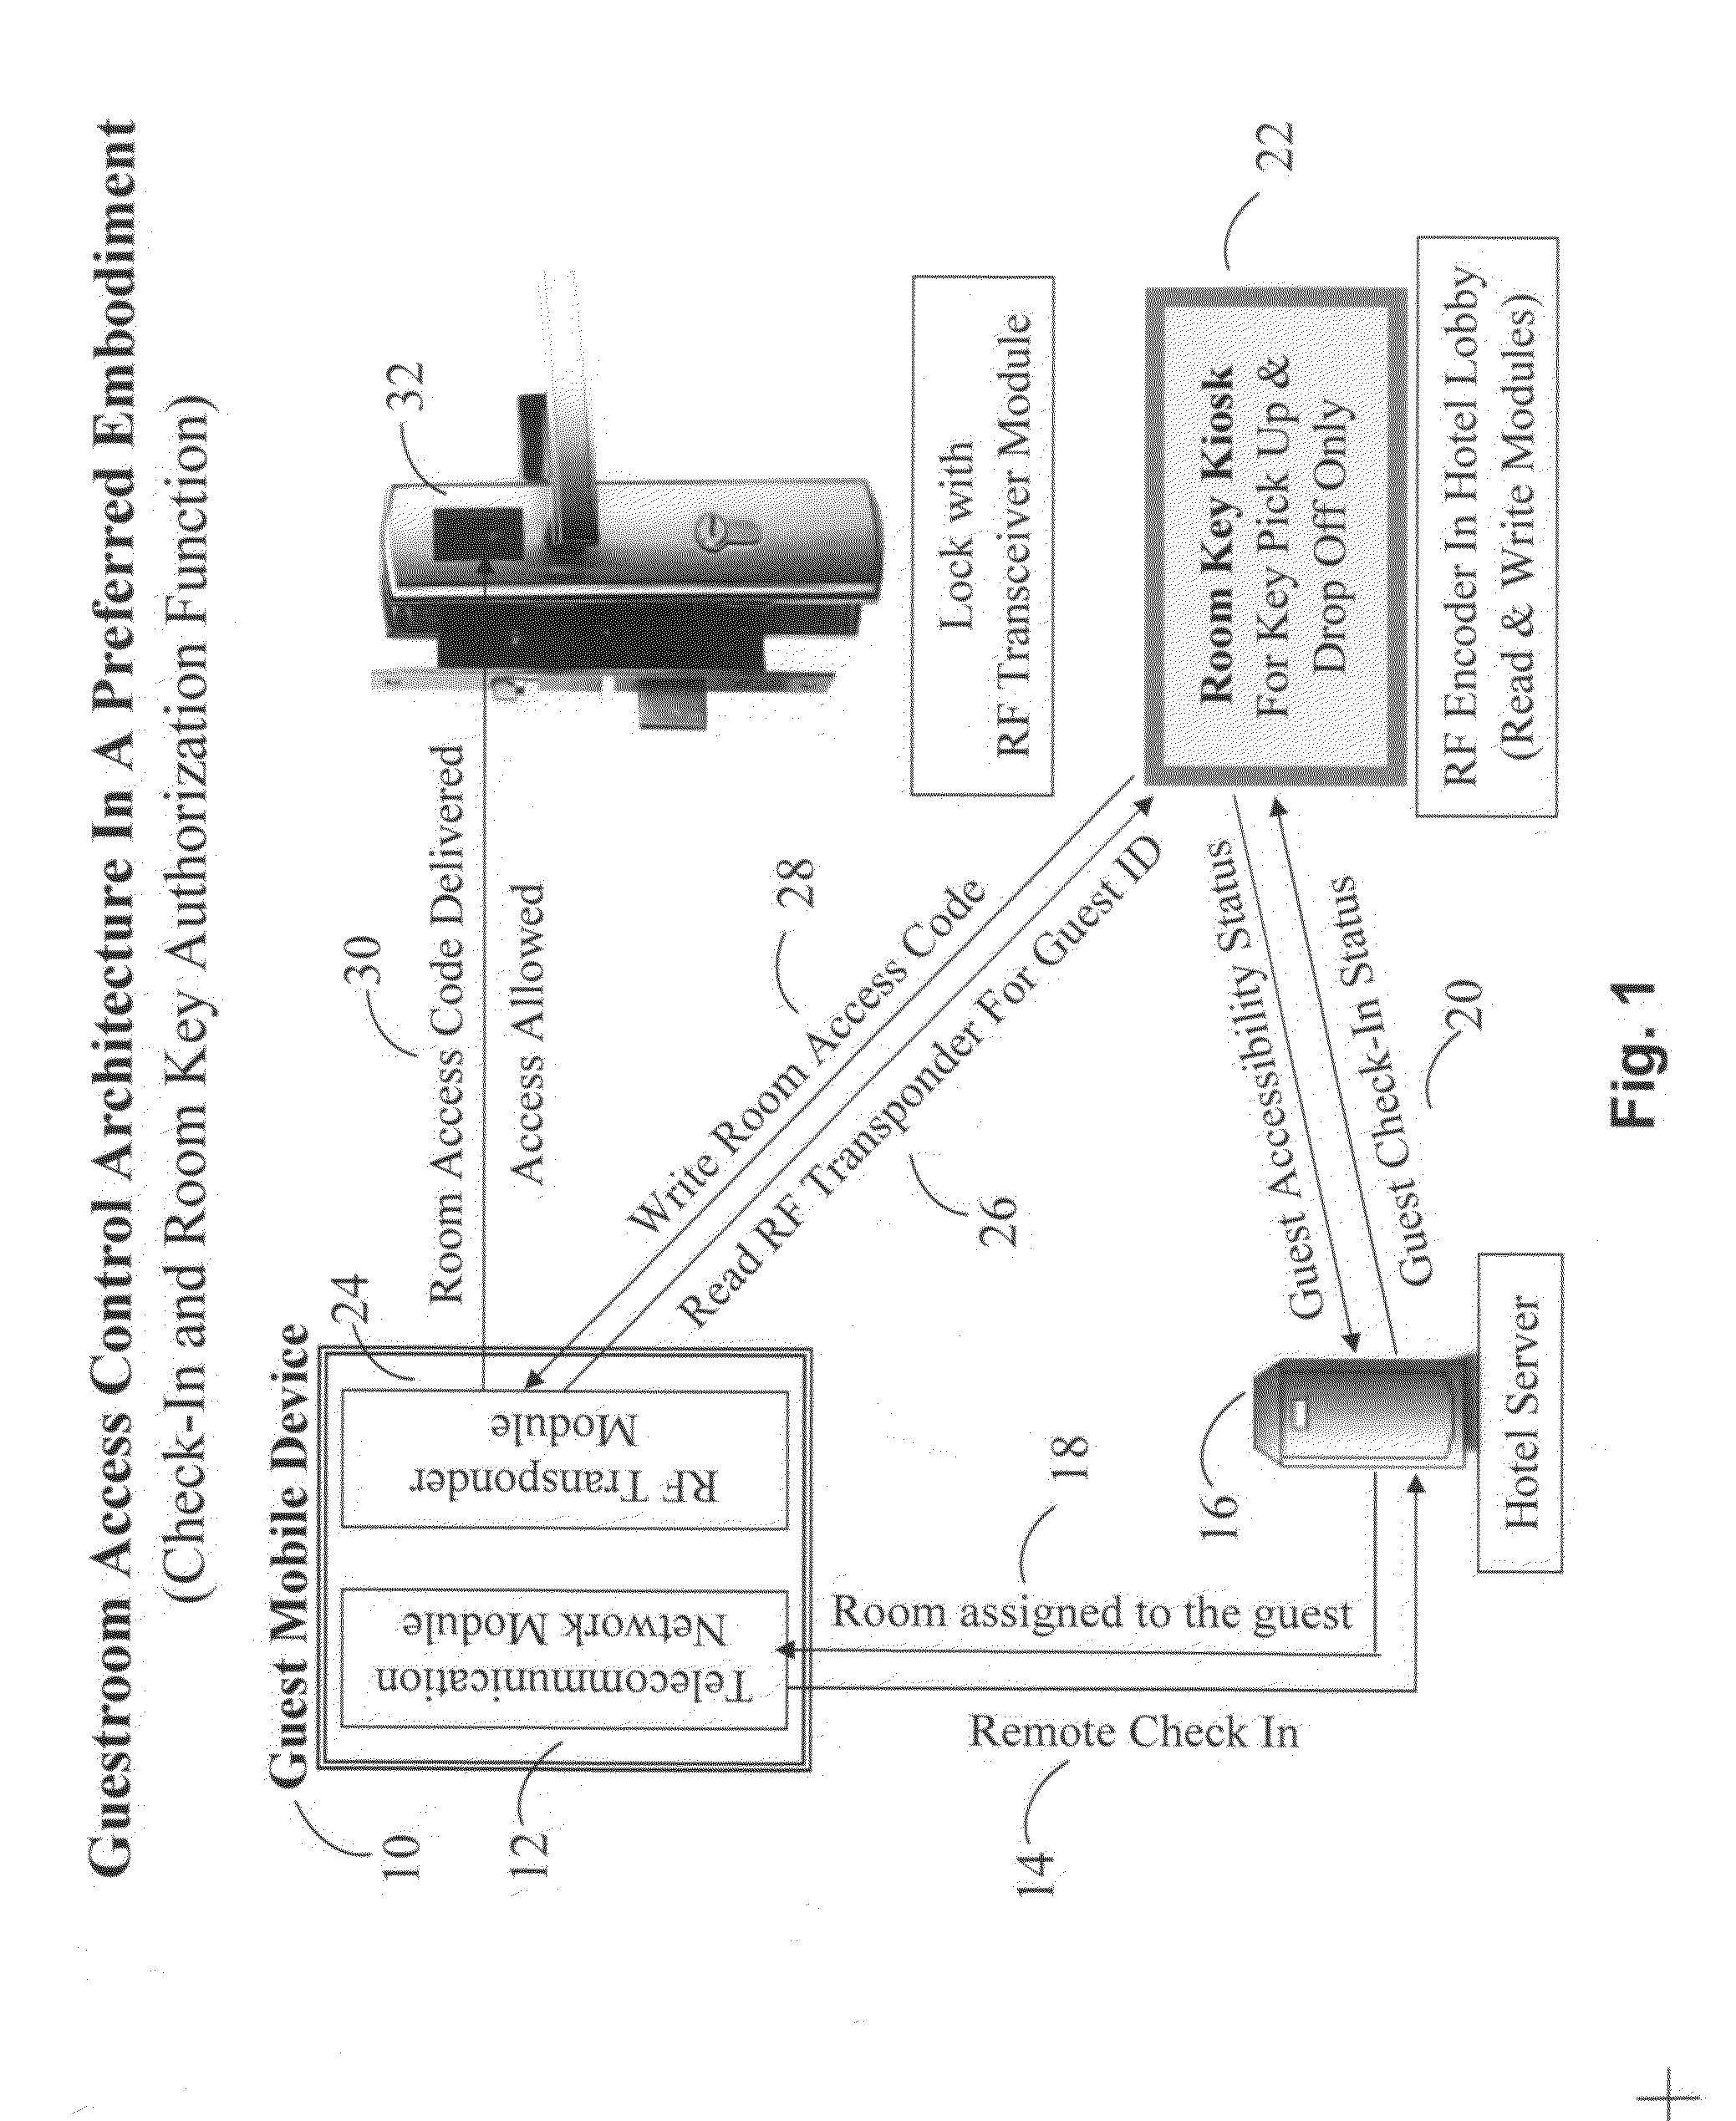 Method of self-service access control for frequent guests of a housing facility